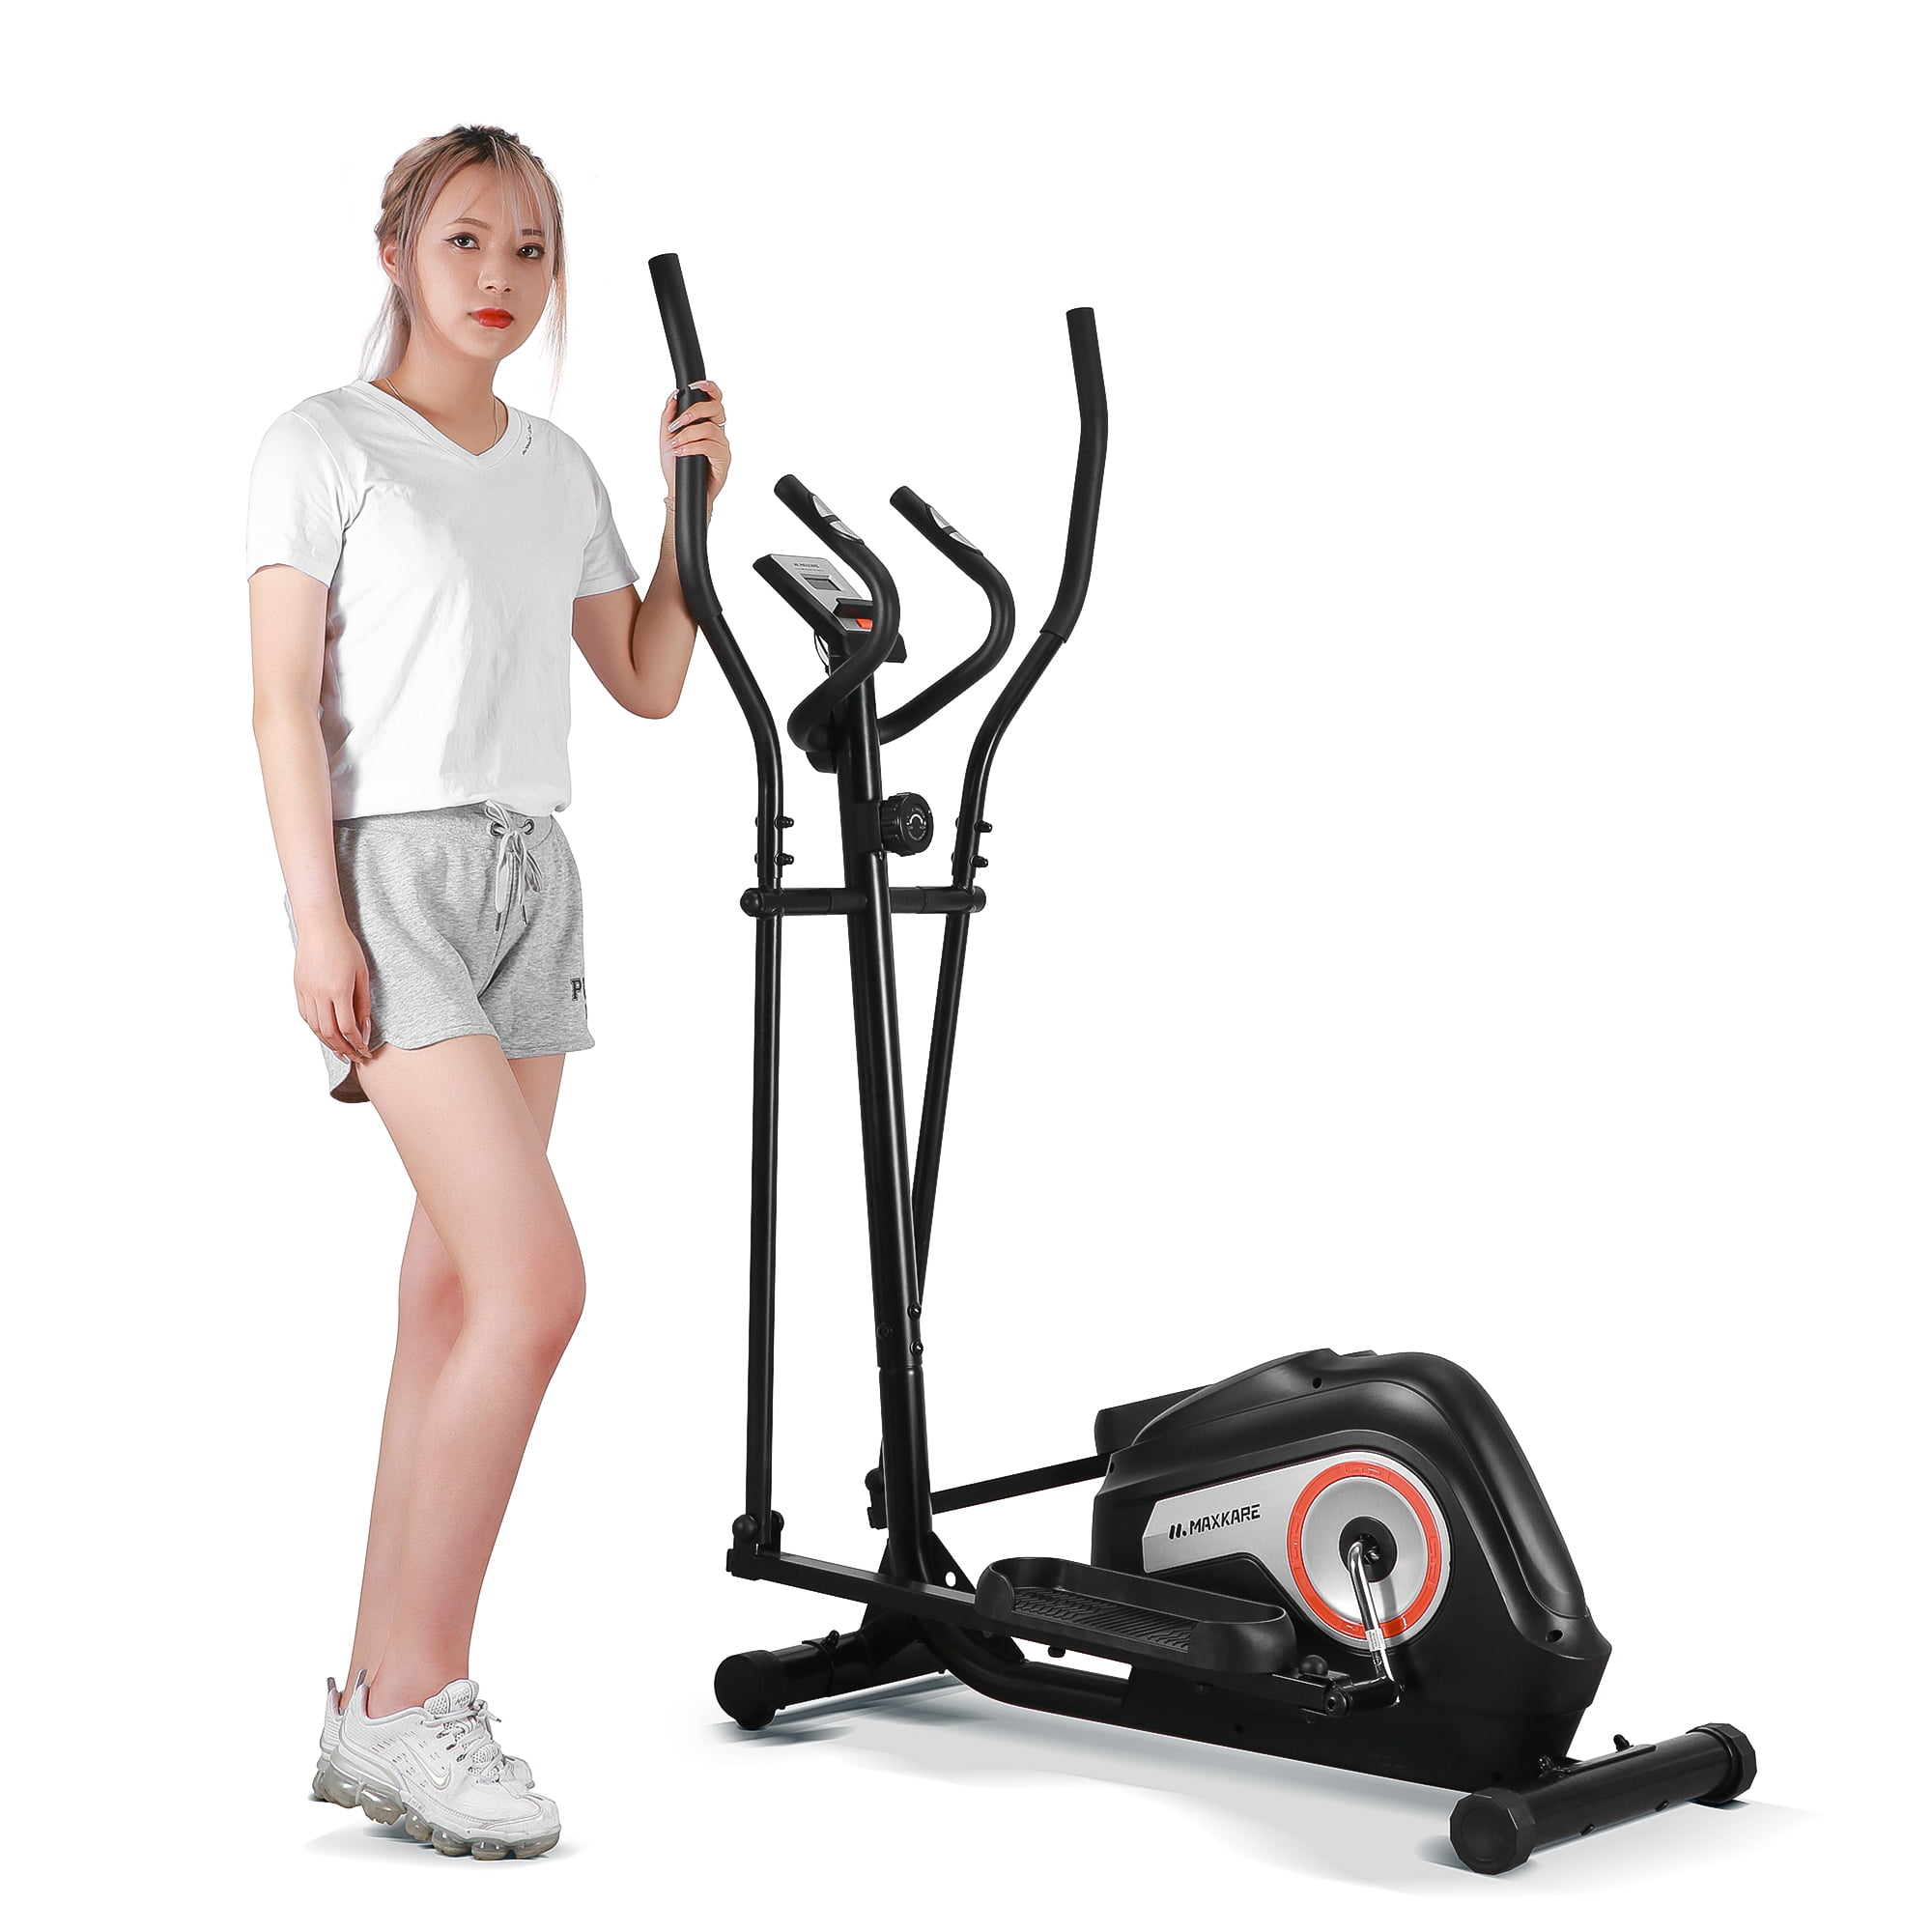 Details about   ANCHEER Magnetic Elliptical Machine Exercise Fitness Home Fitness Gym Sport 